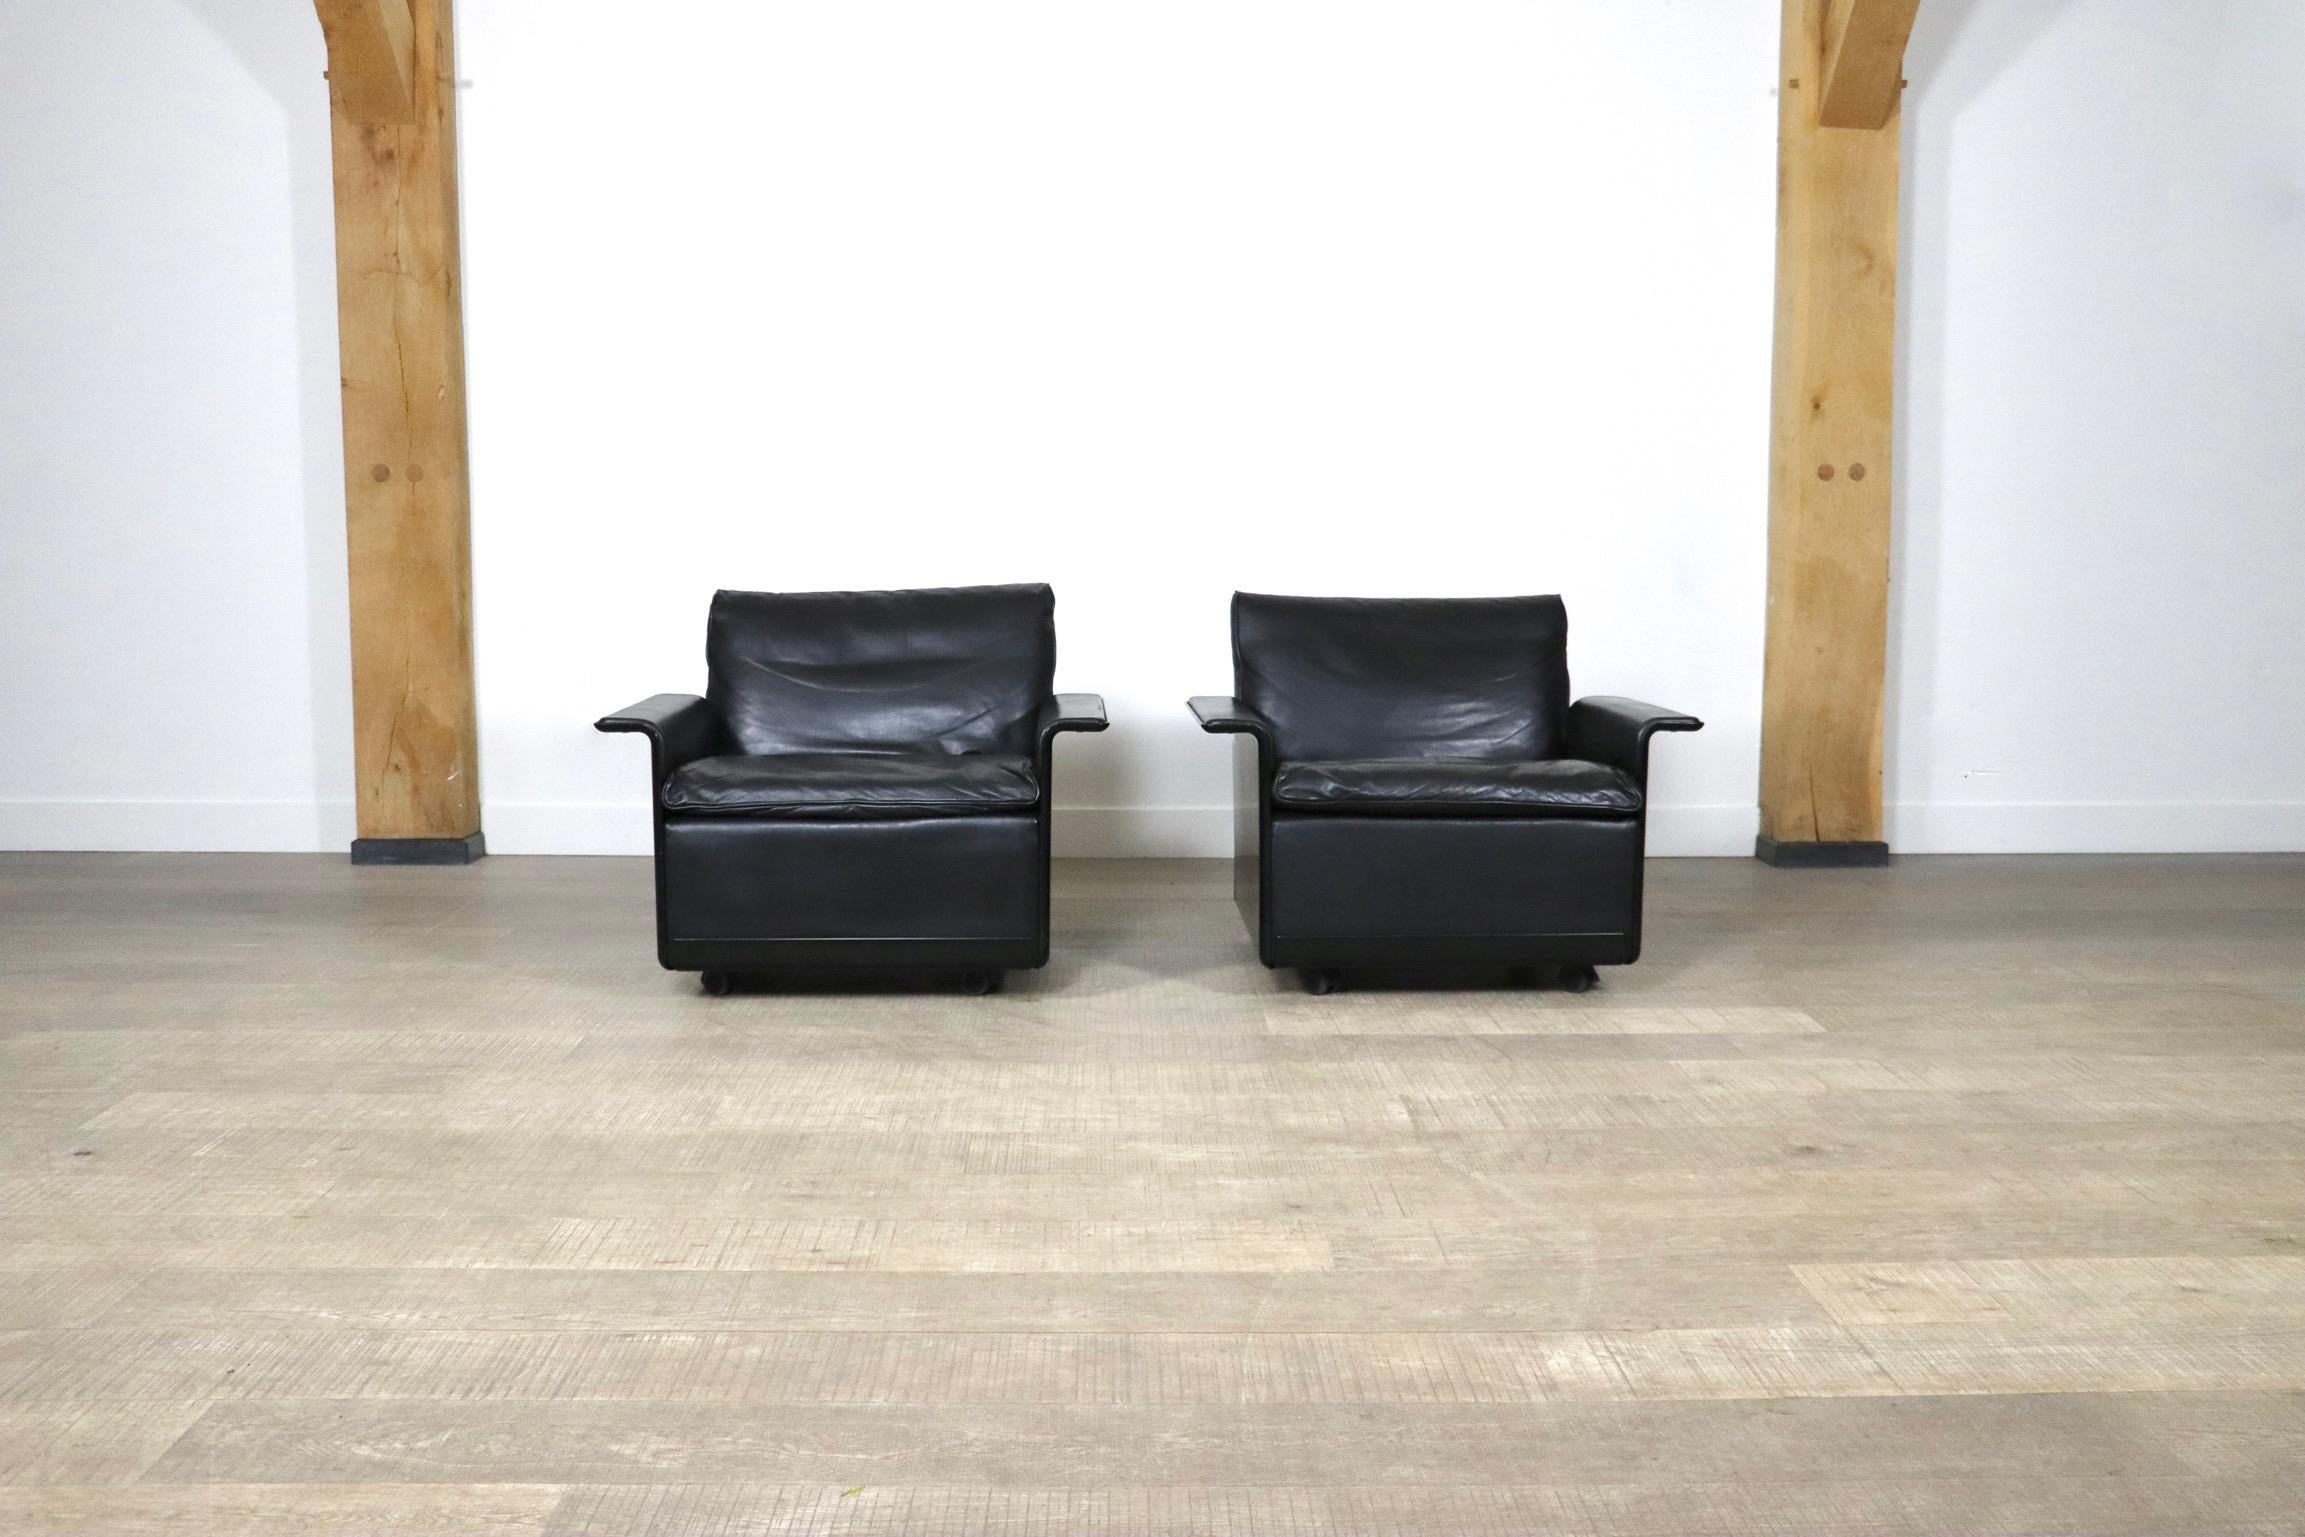 Amazing pair of model 620 lounge chairs in black leather by Dieter Rams for Vitsoe. The black outer shell is made from a hot-pressed sheet-moulding compound, which is similar to, but stronger than fiberglass. This sofa is made with the